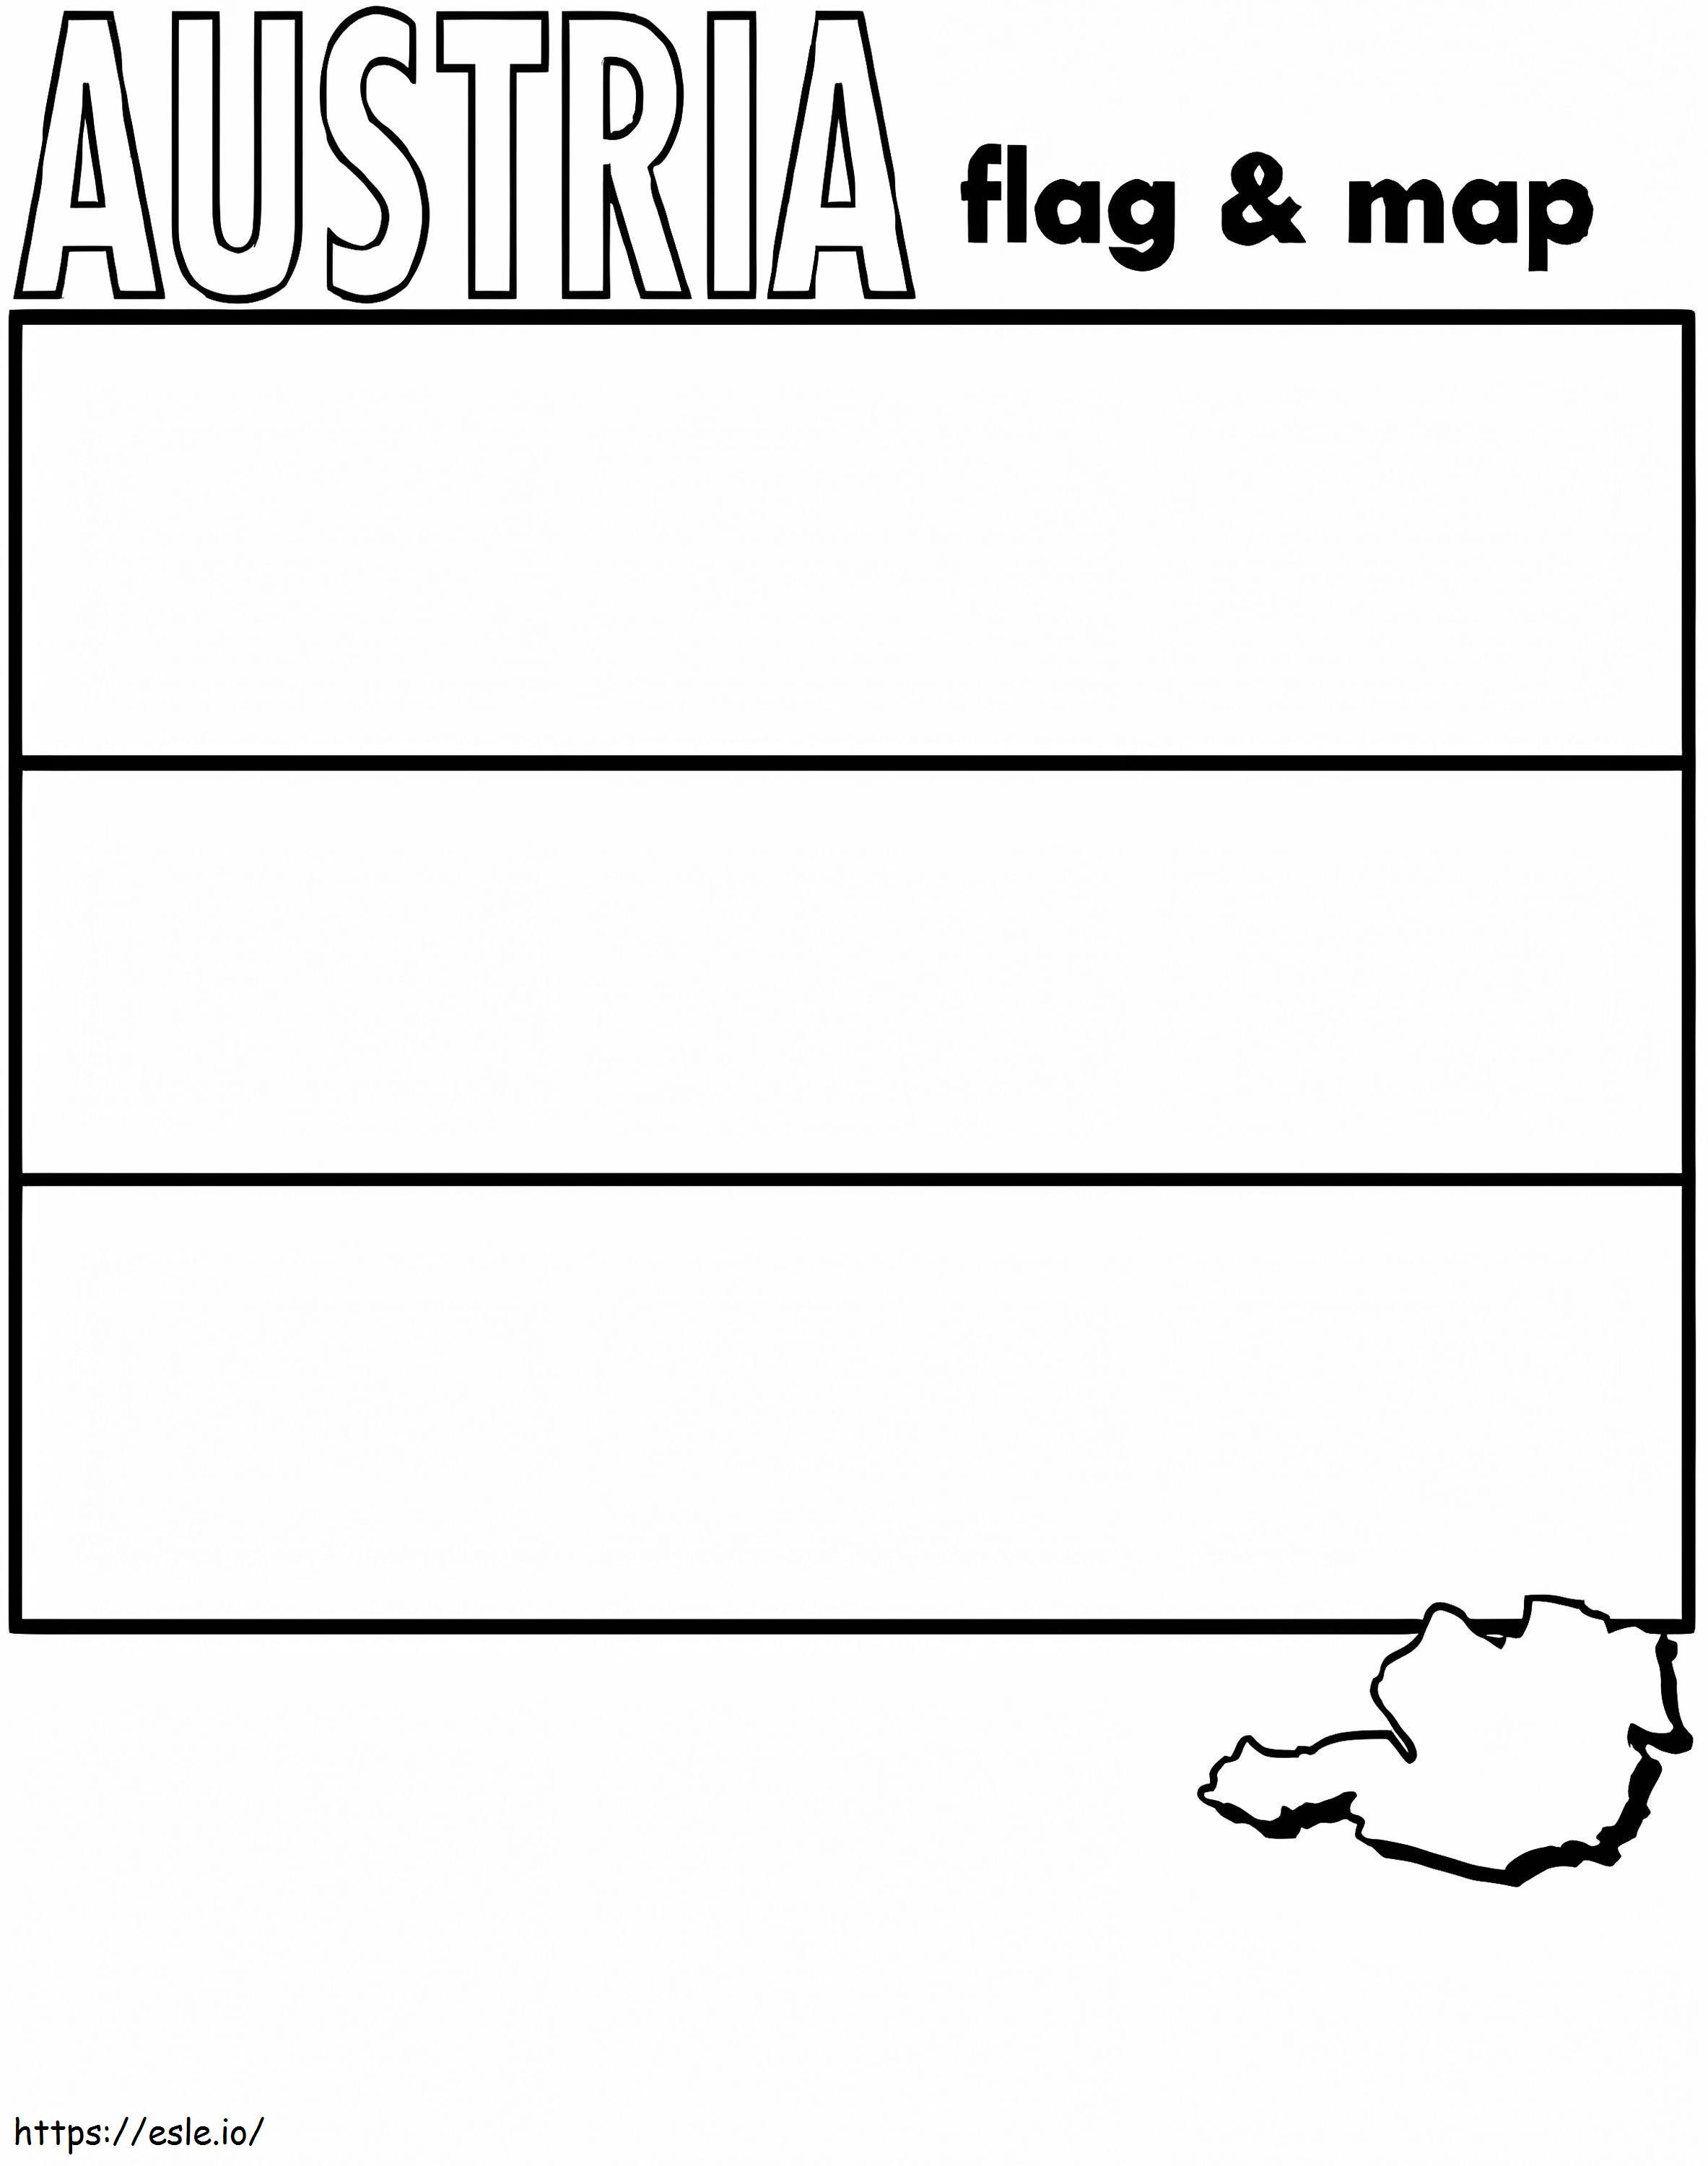 Austria Flag And Map coloring page